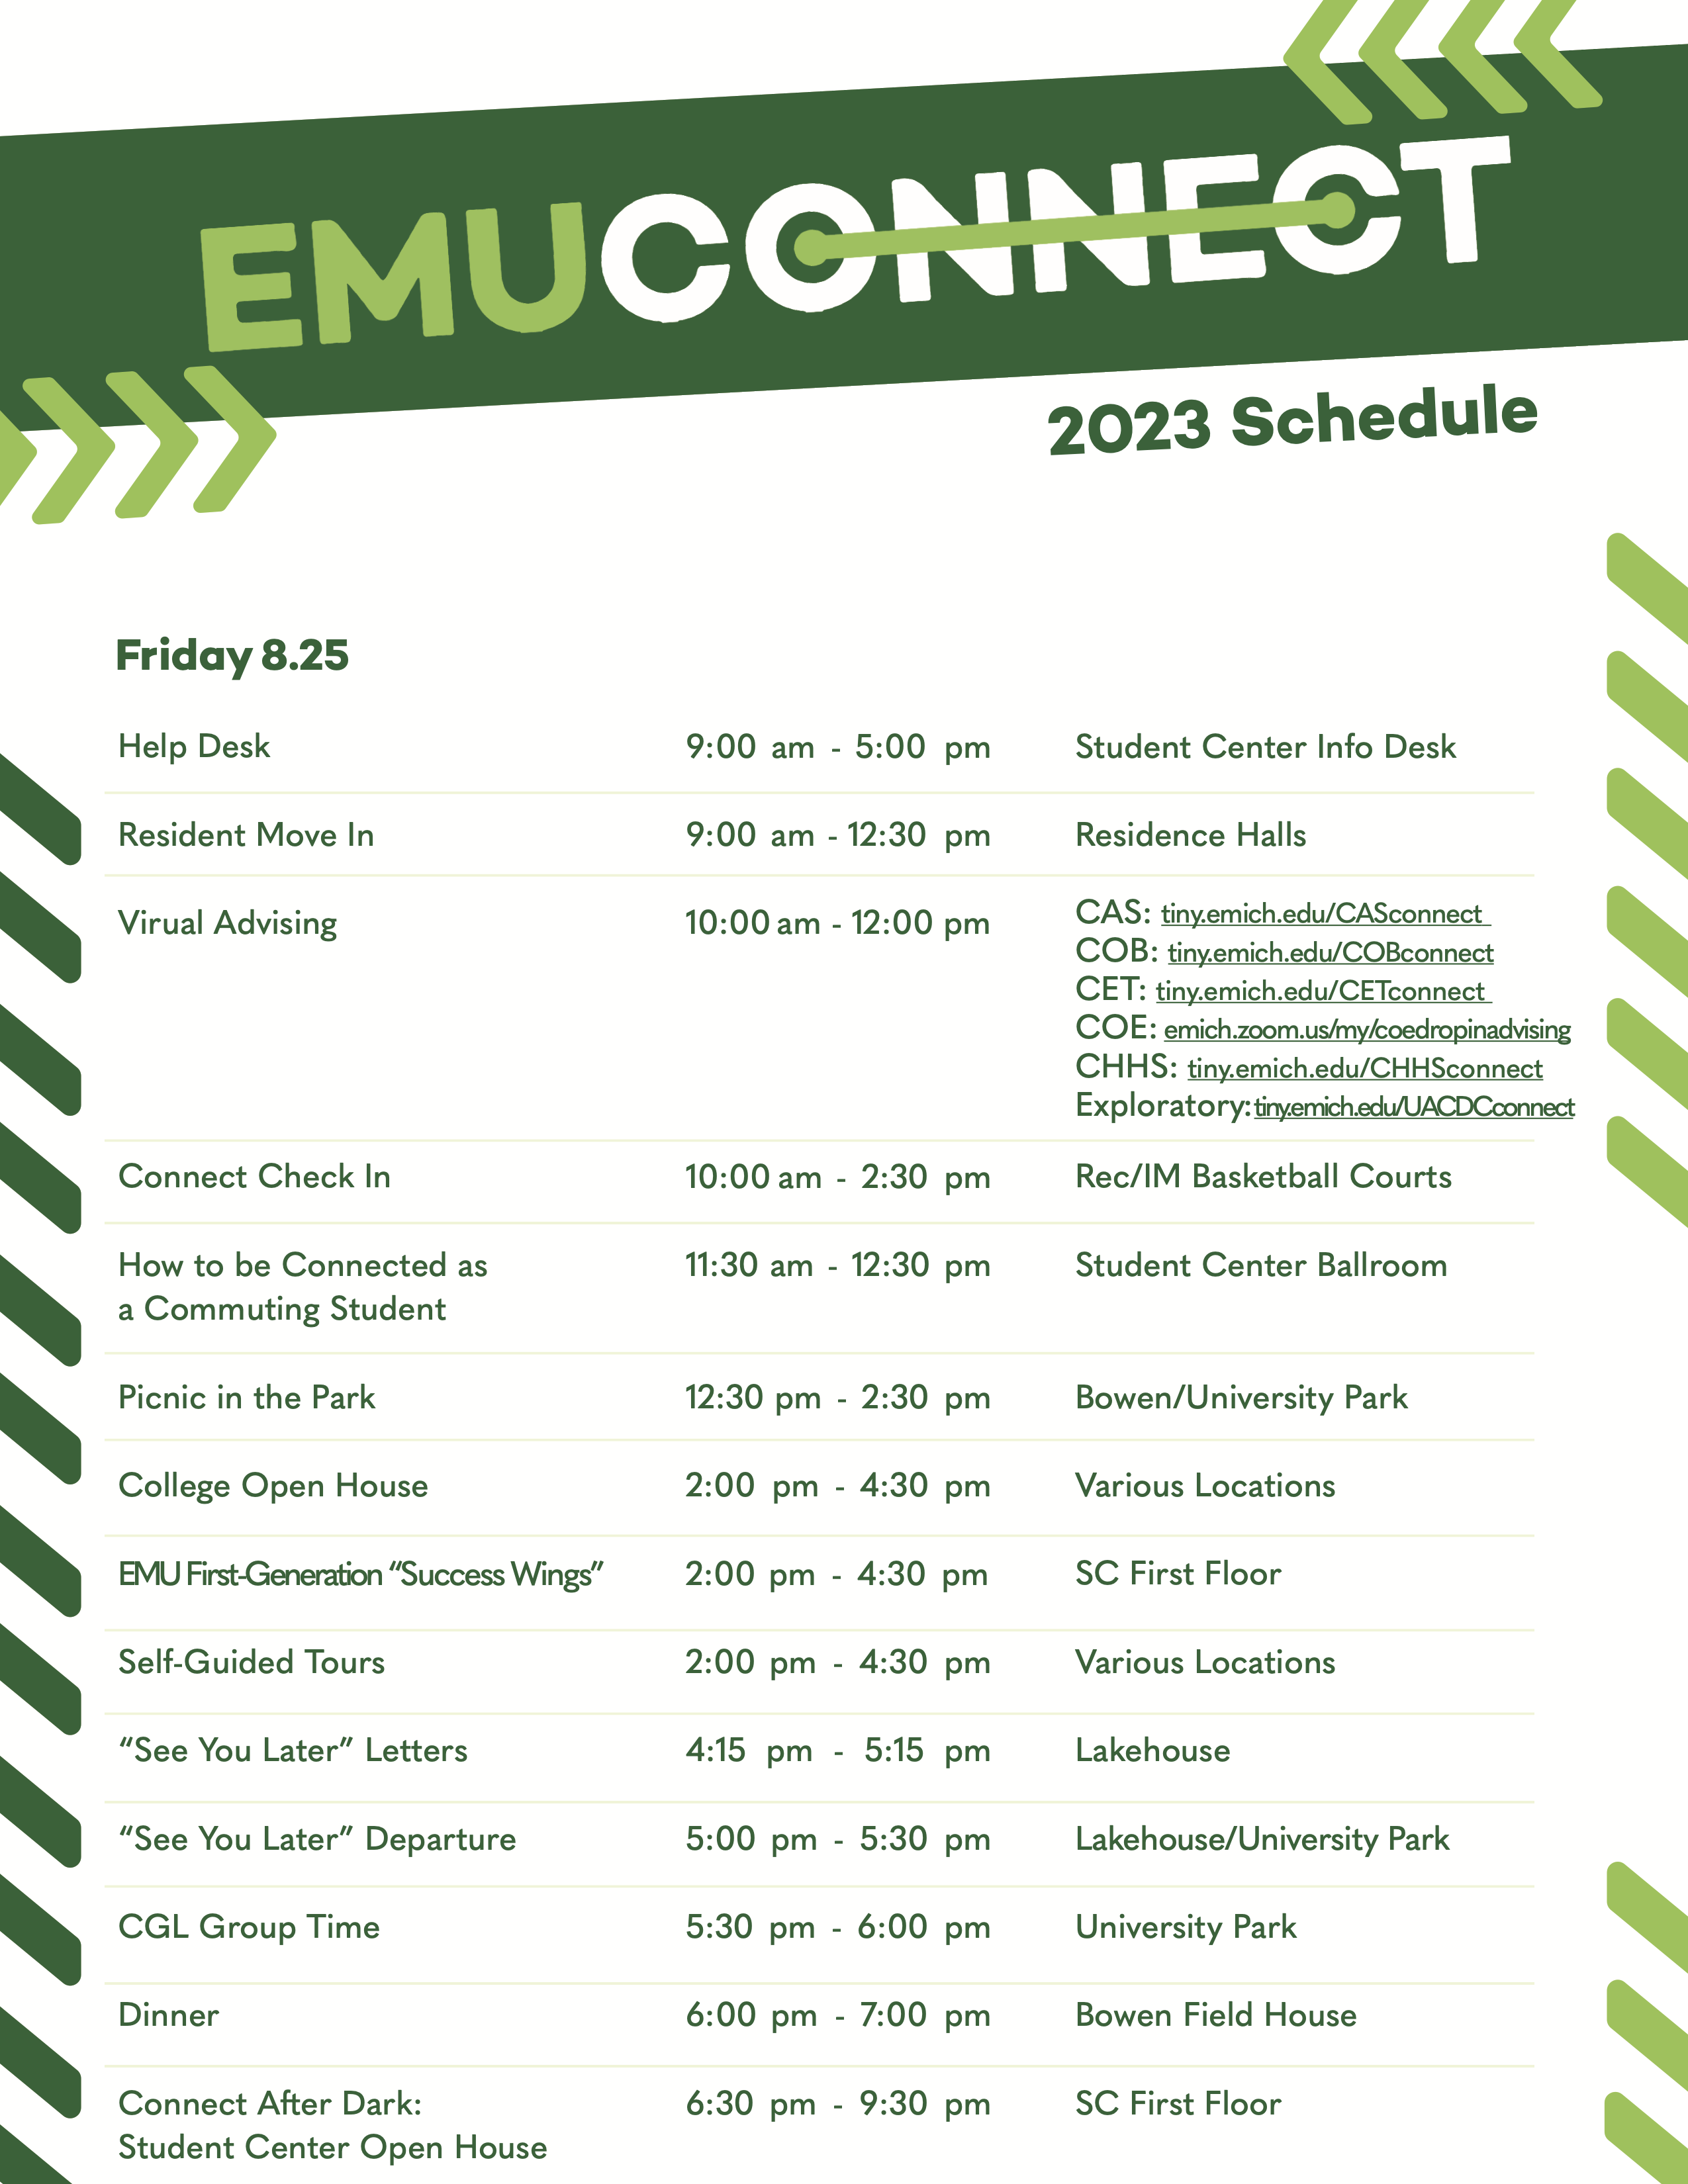 EMU Connect Day 1 Schedule